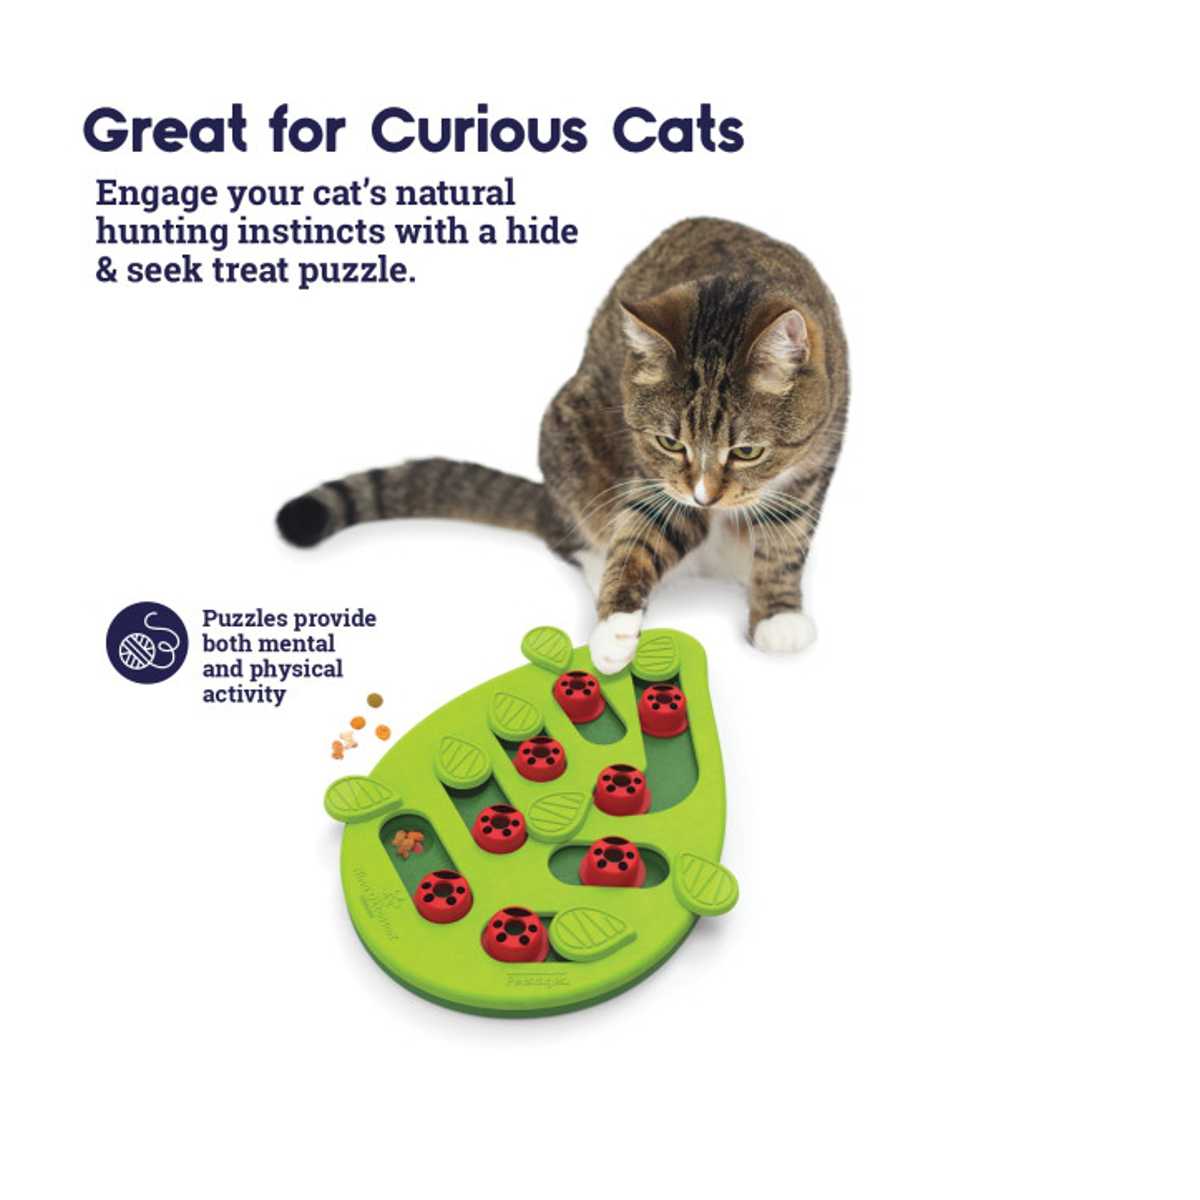 Nina Ottosson by Petstages Melon Madness Puzzle & Play - Interactive Cat  Treat Puzzle